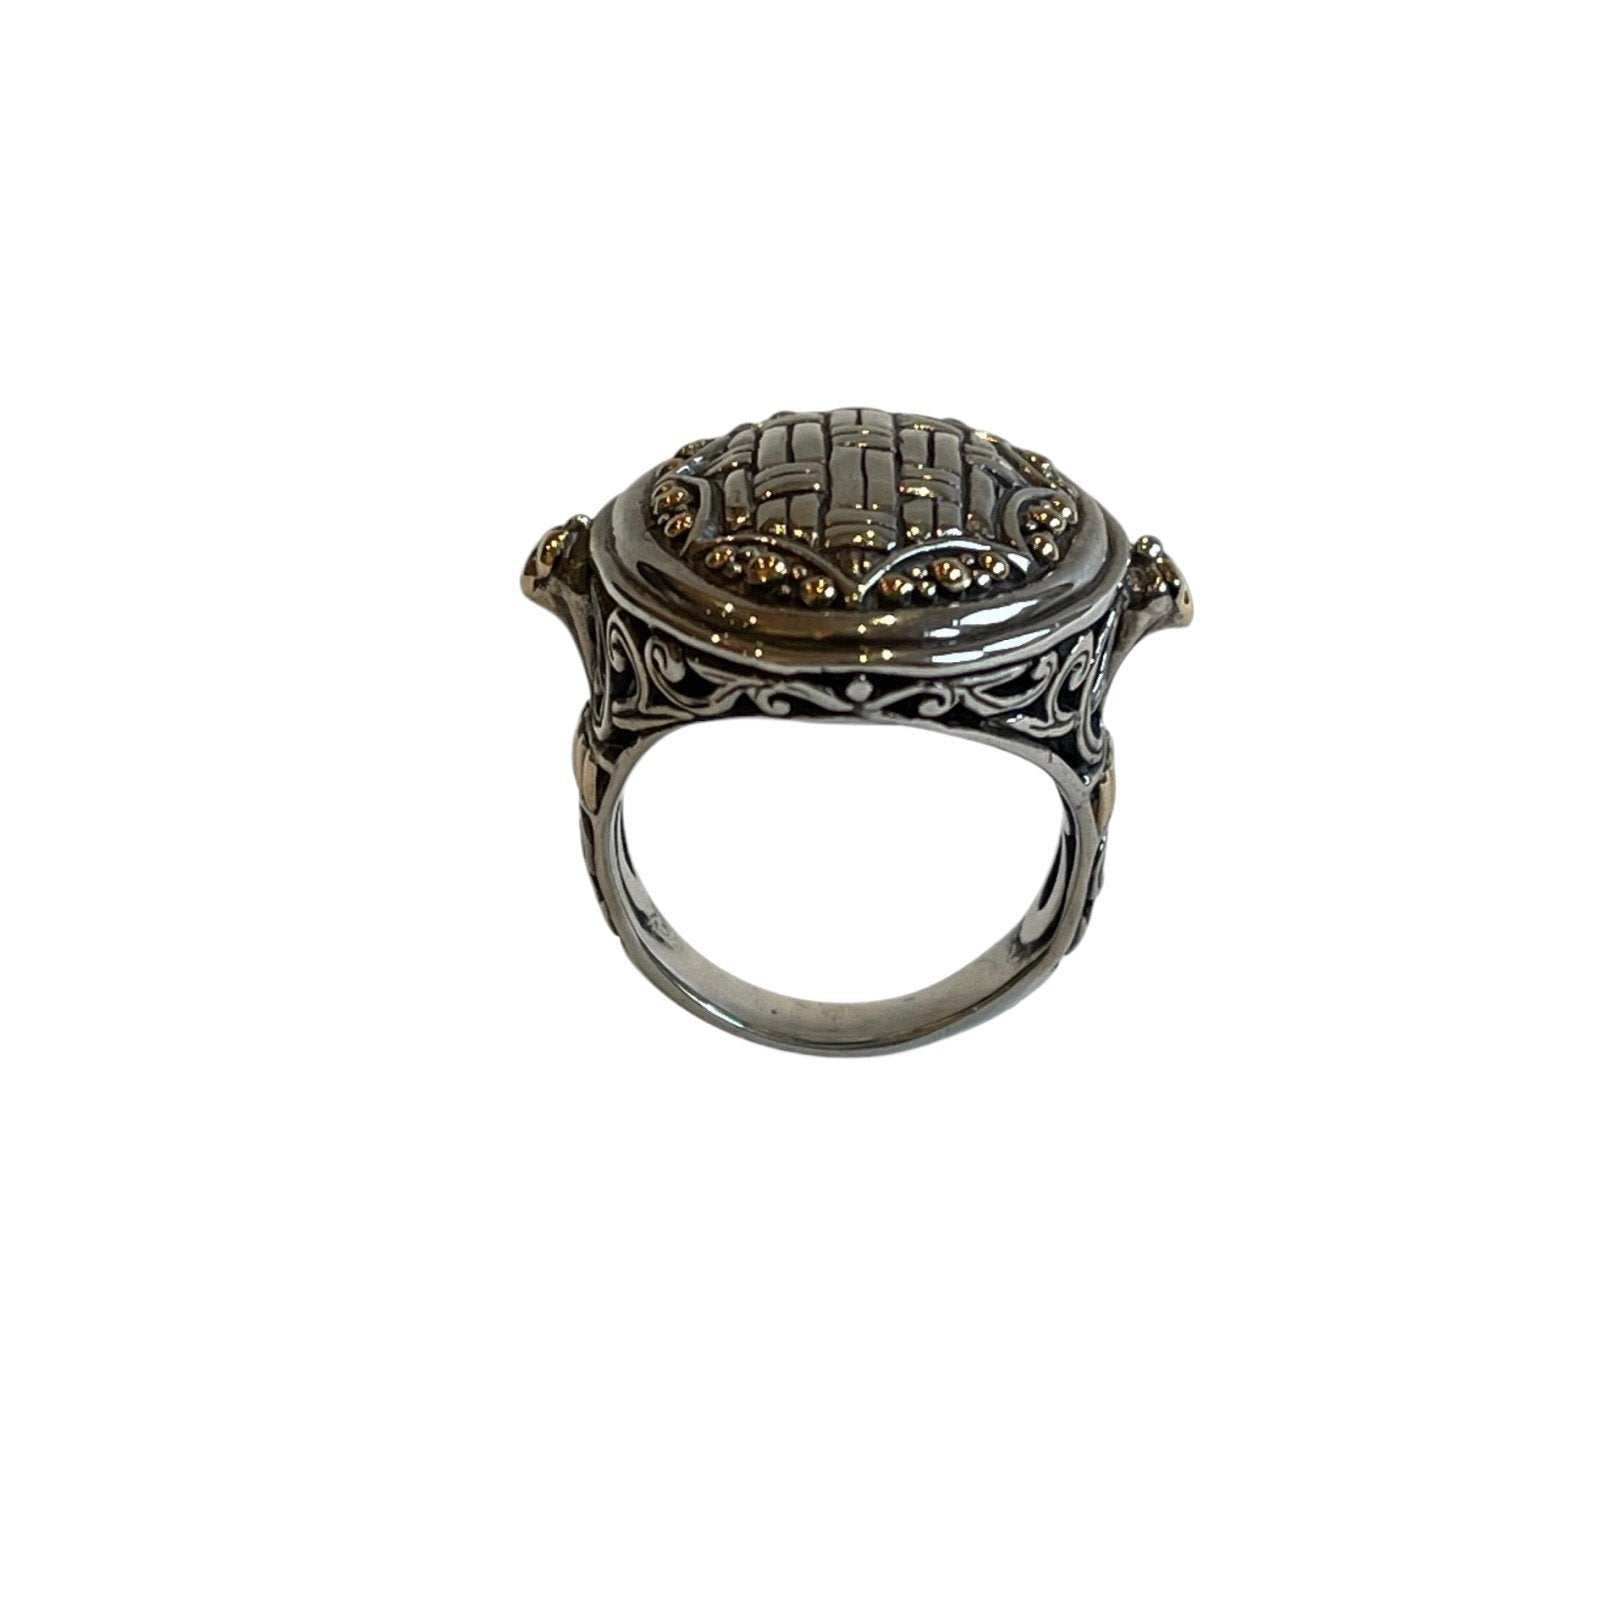 Sterling silver ring with 18ct accents